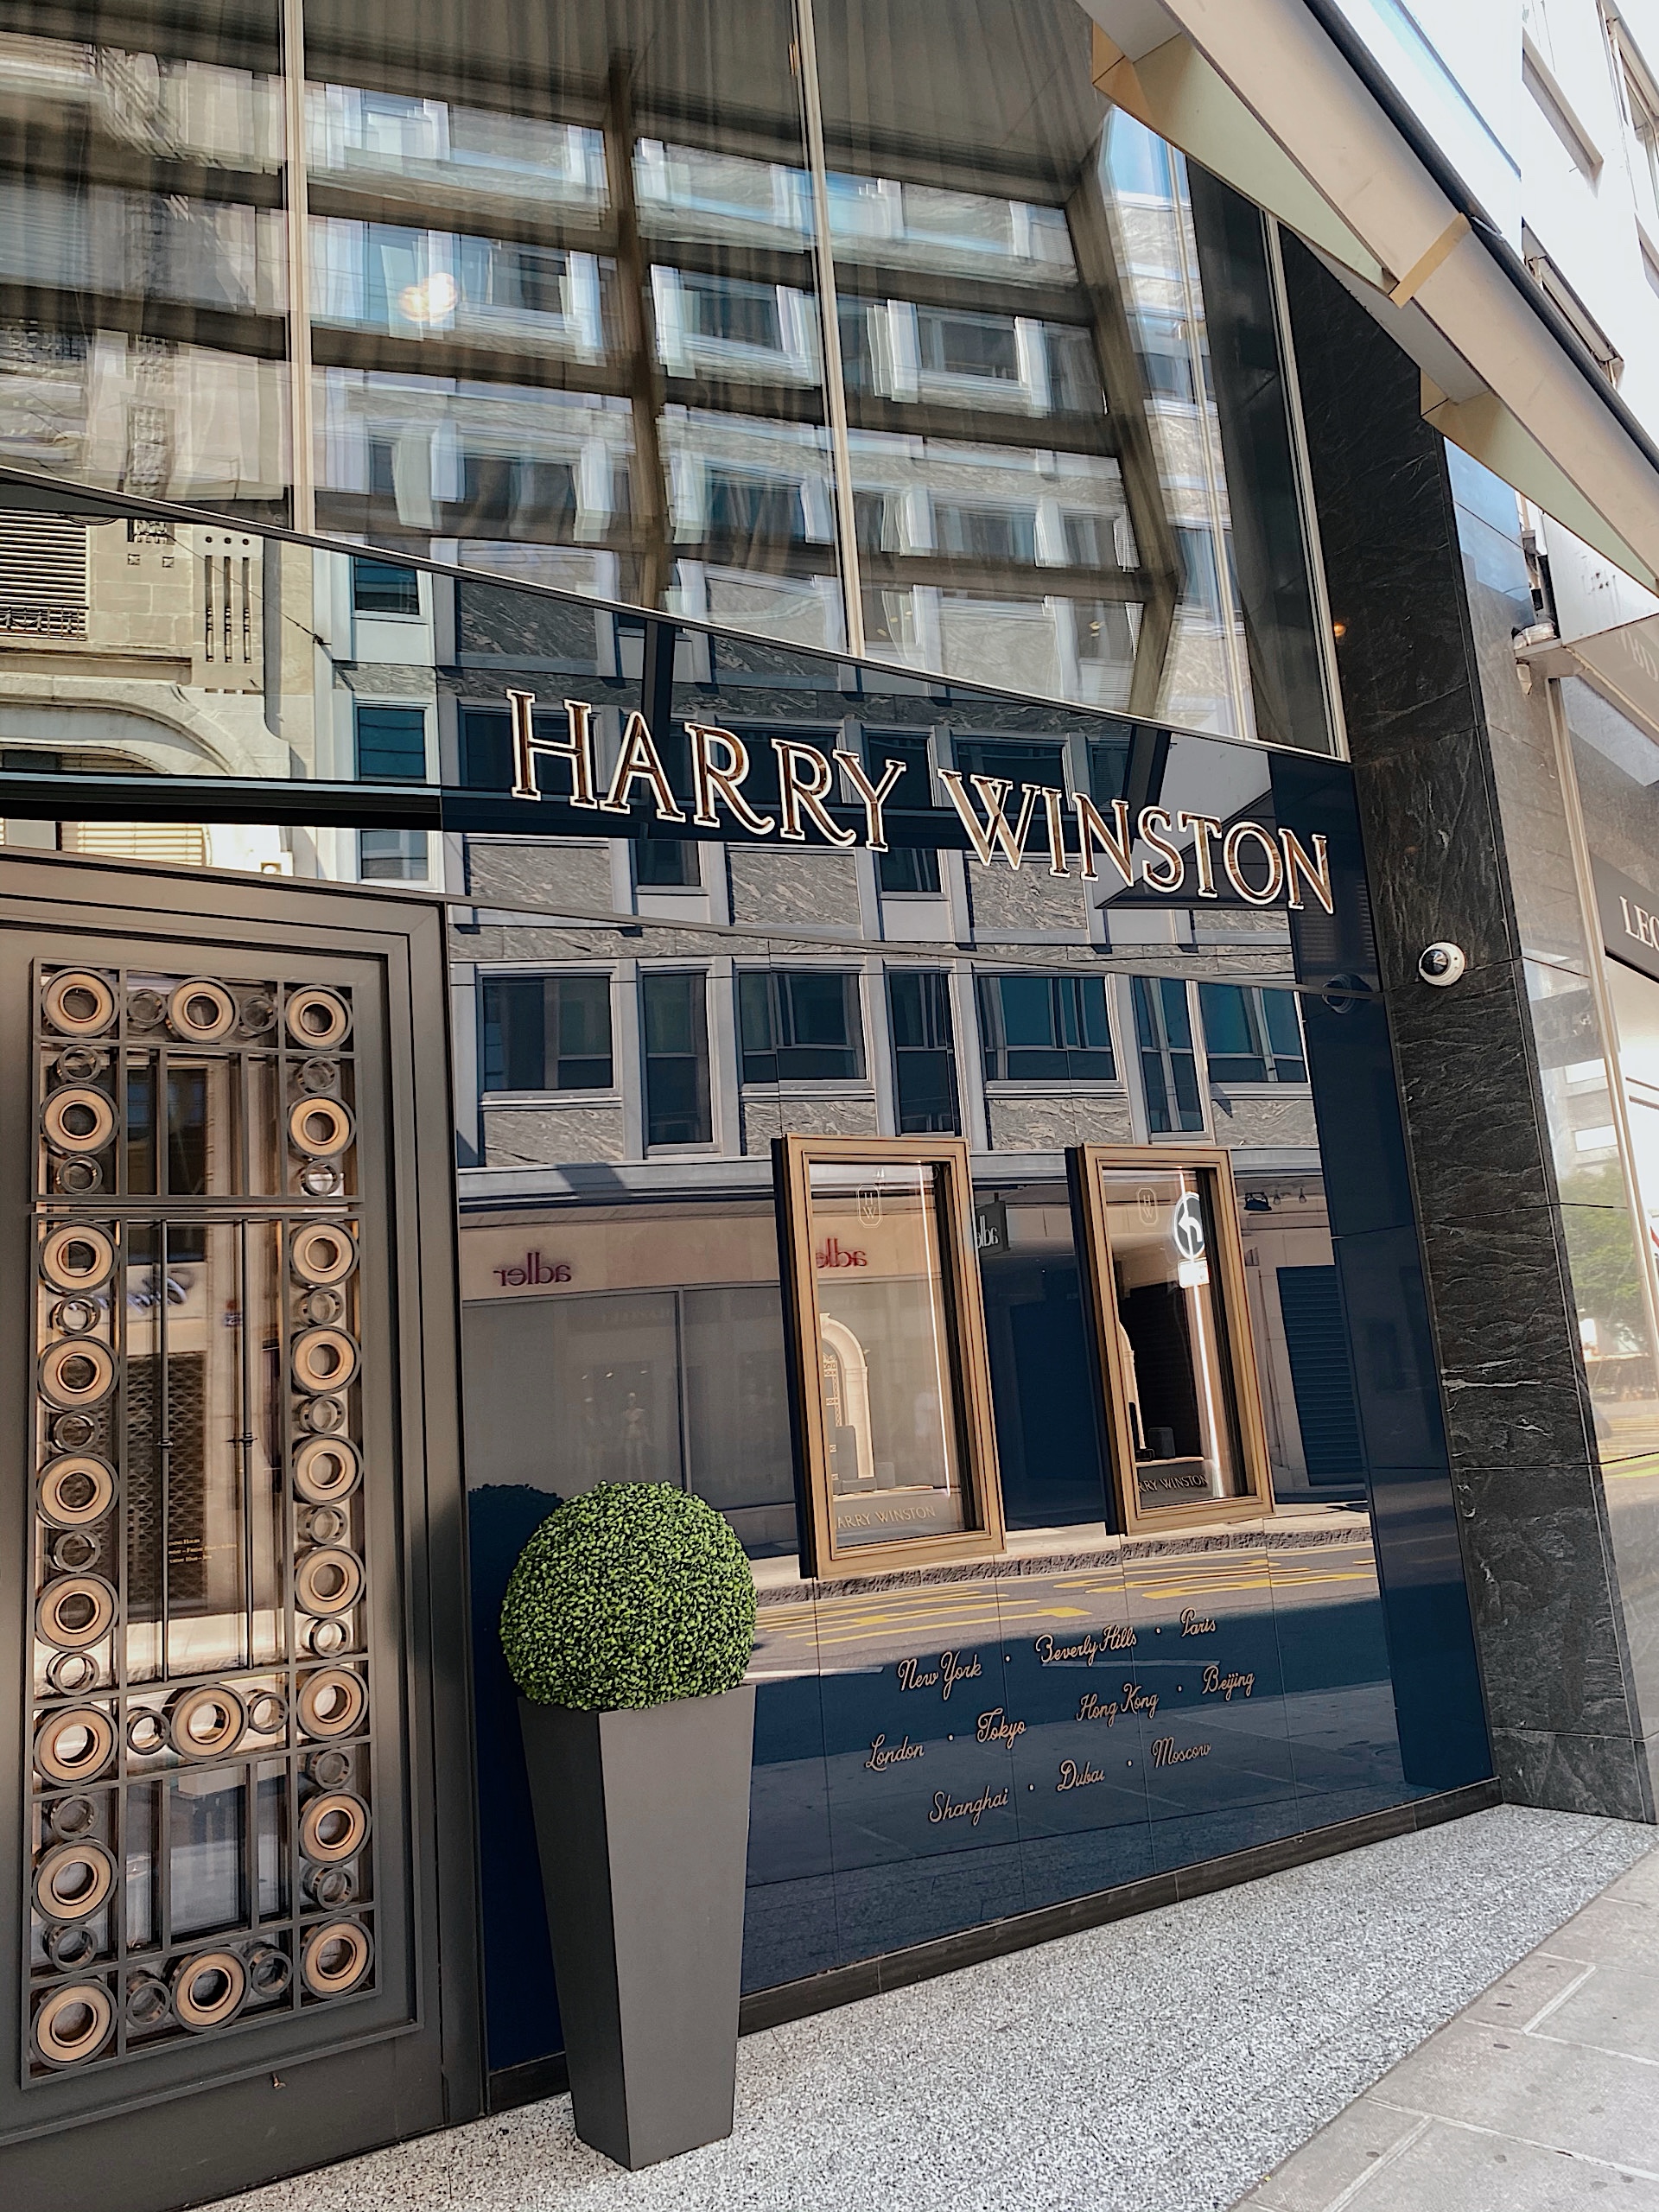 3 things you didn’t know about Harry Winston